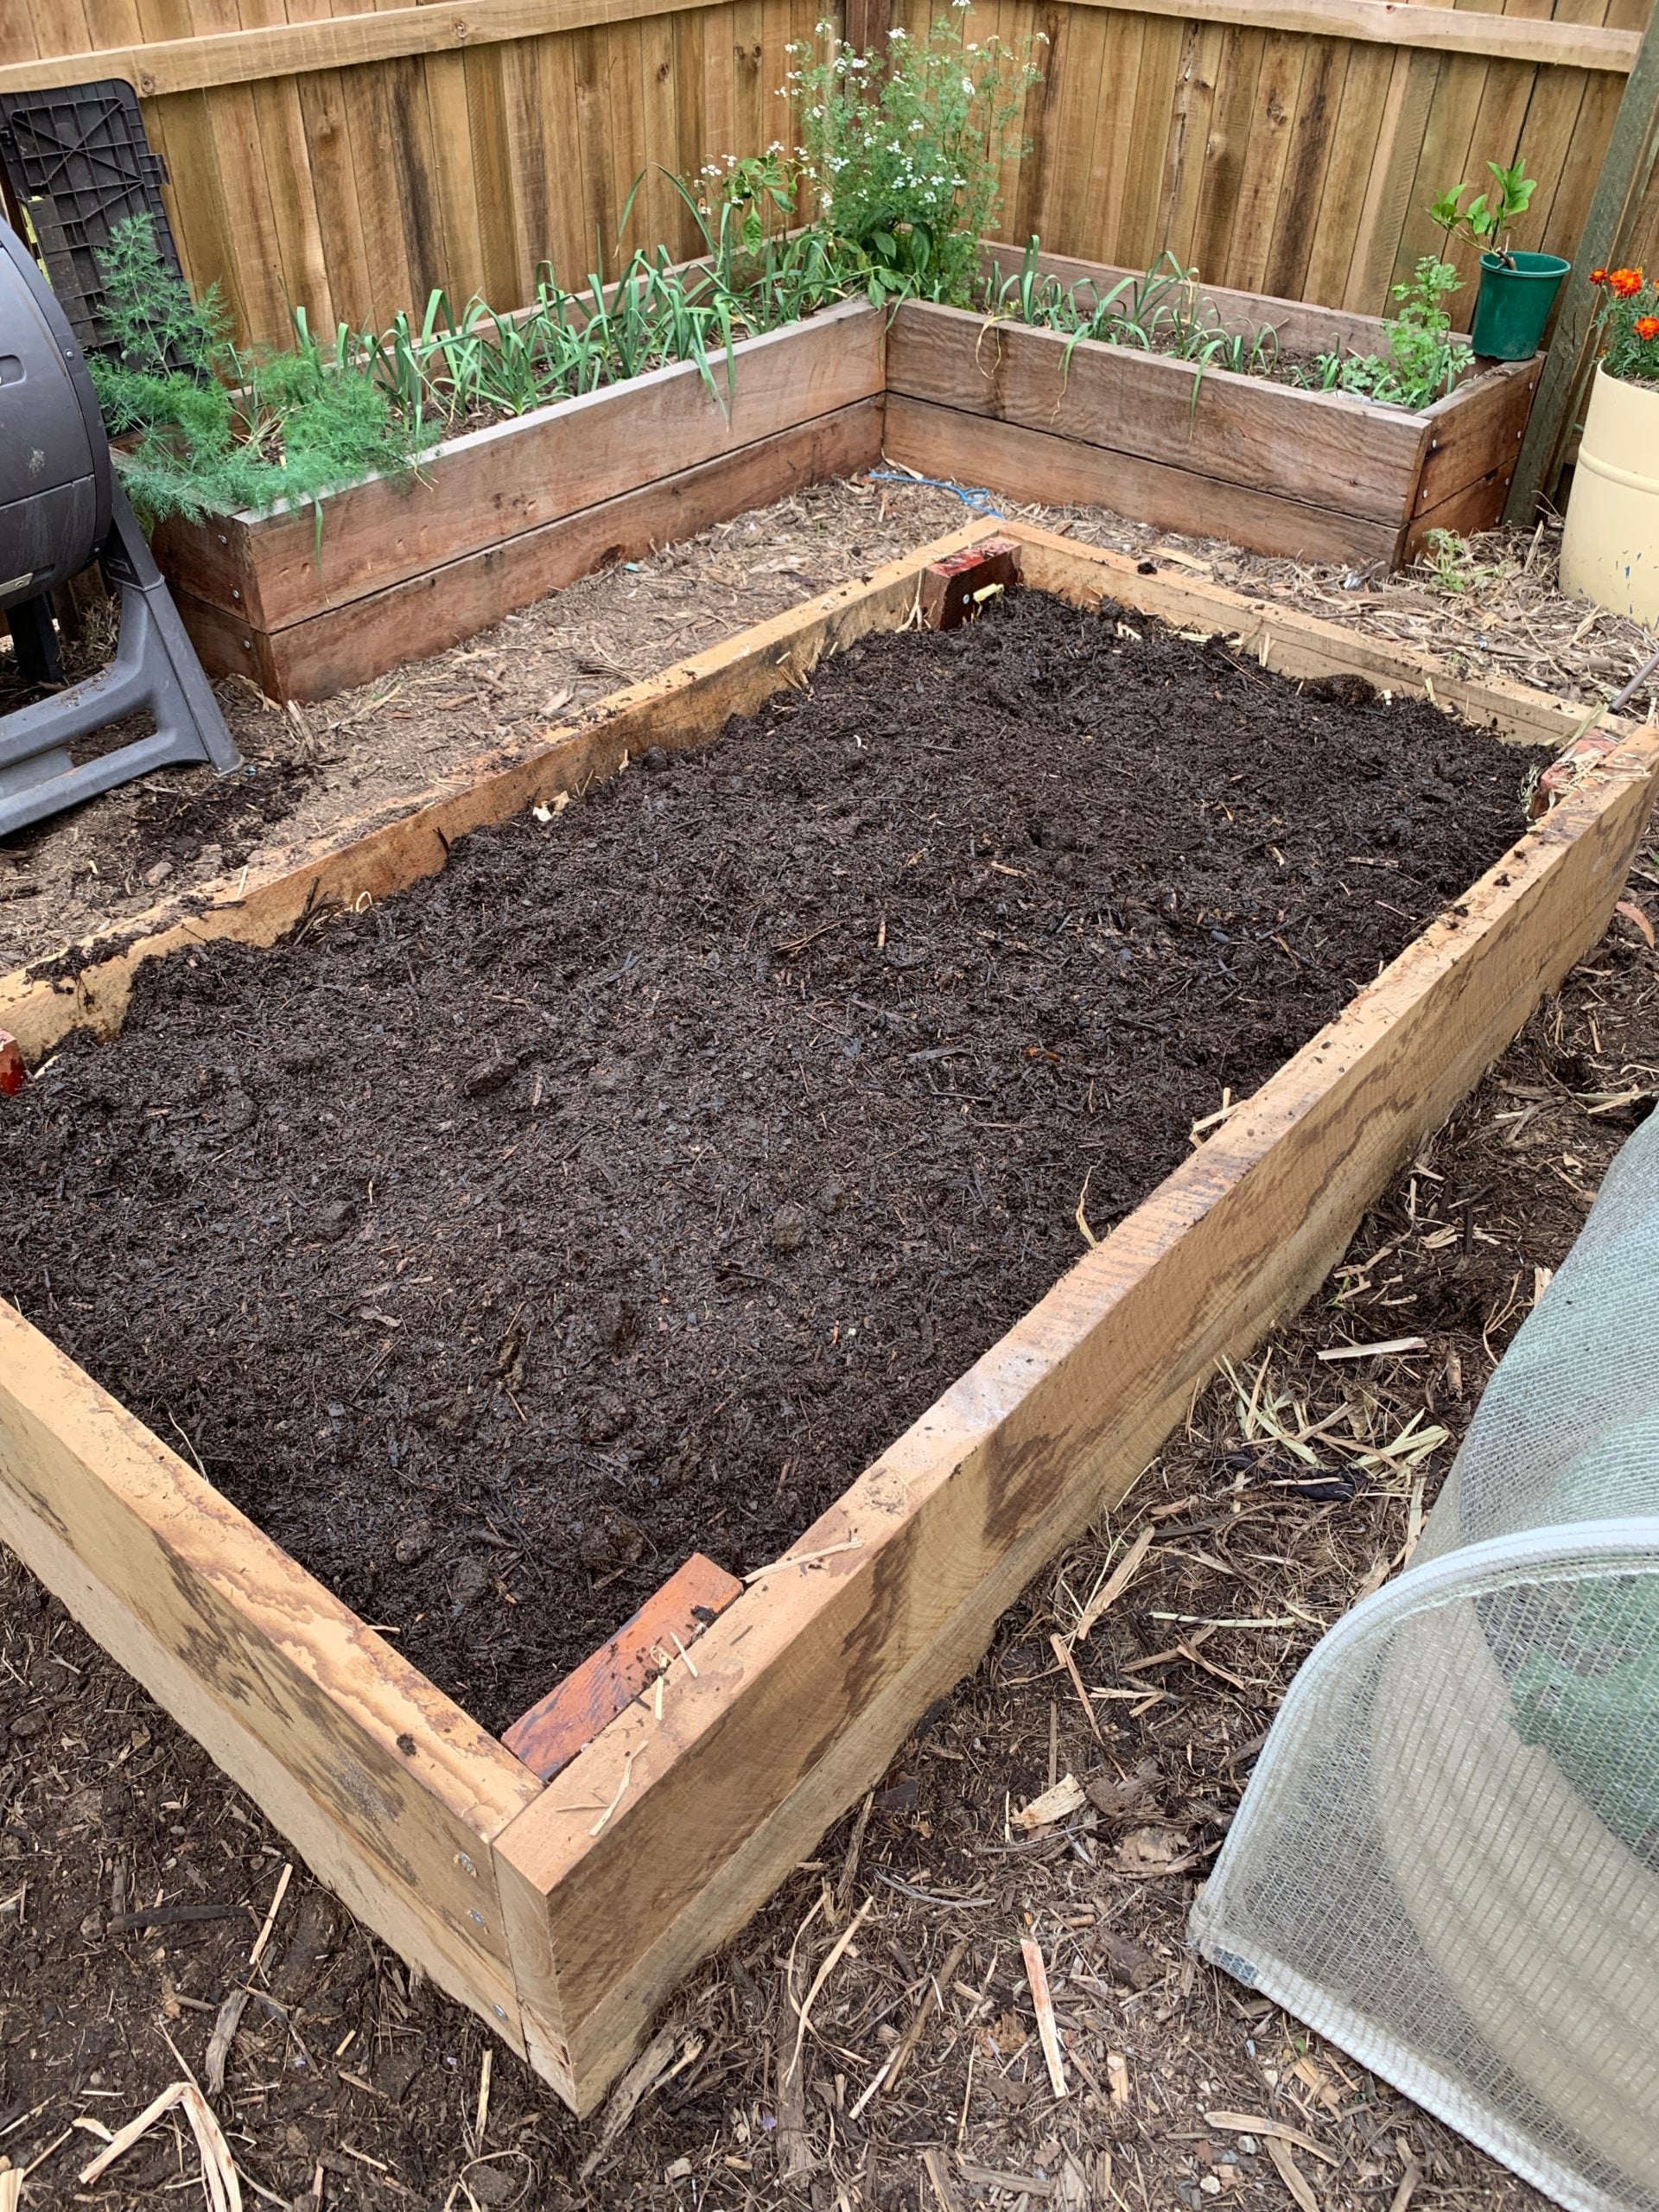 How To Fill A Raised Bed For Under 10, How To Fill A Raised Veggie Garden